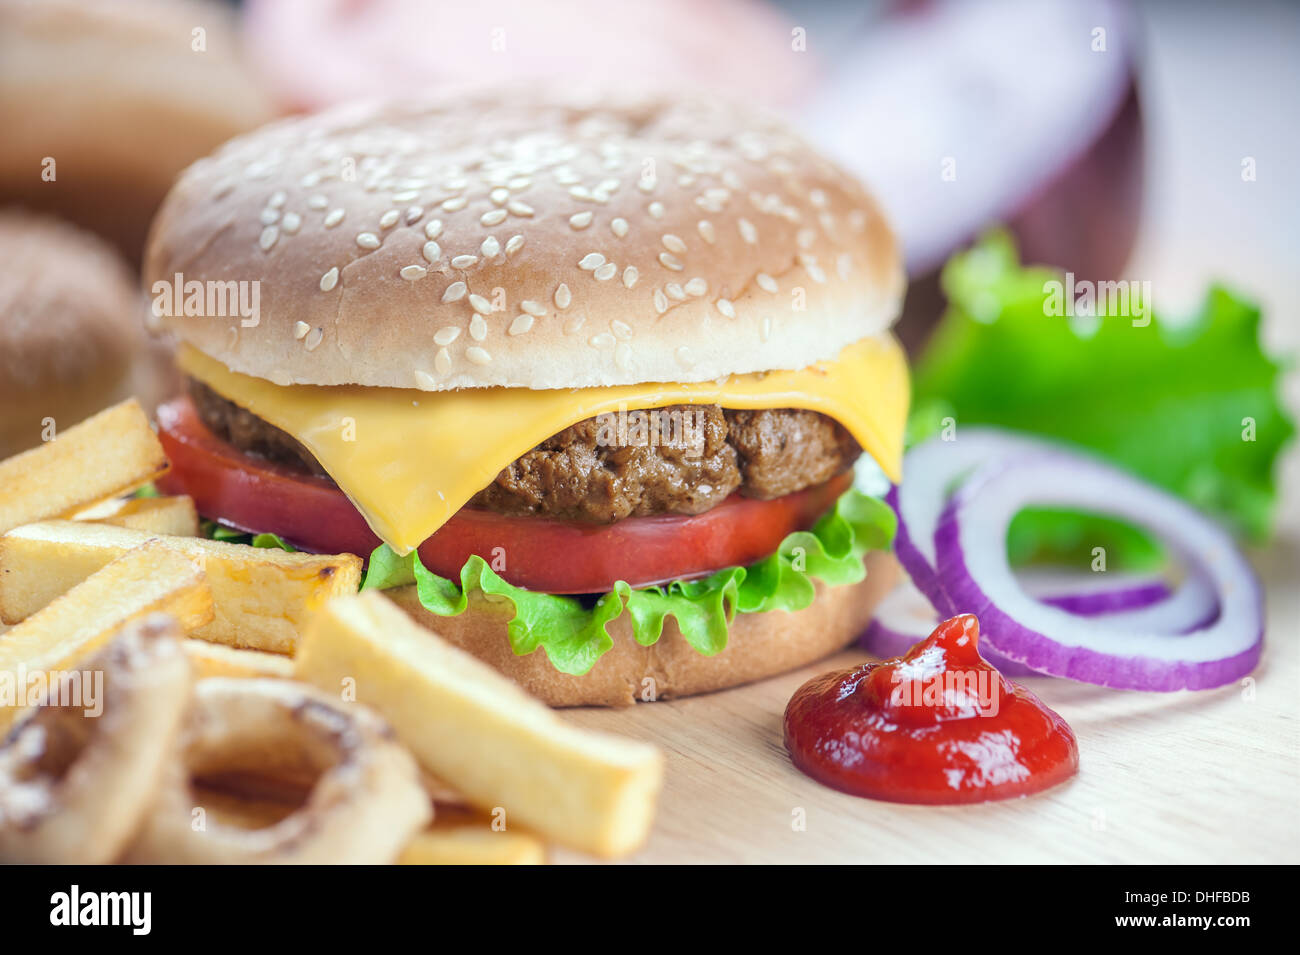 appetizing cheeseburger with red onion closeup Stock Photo